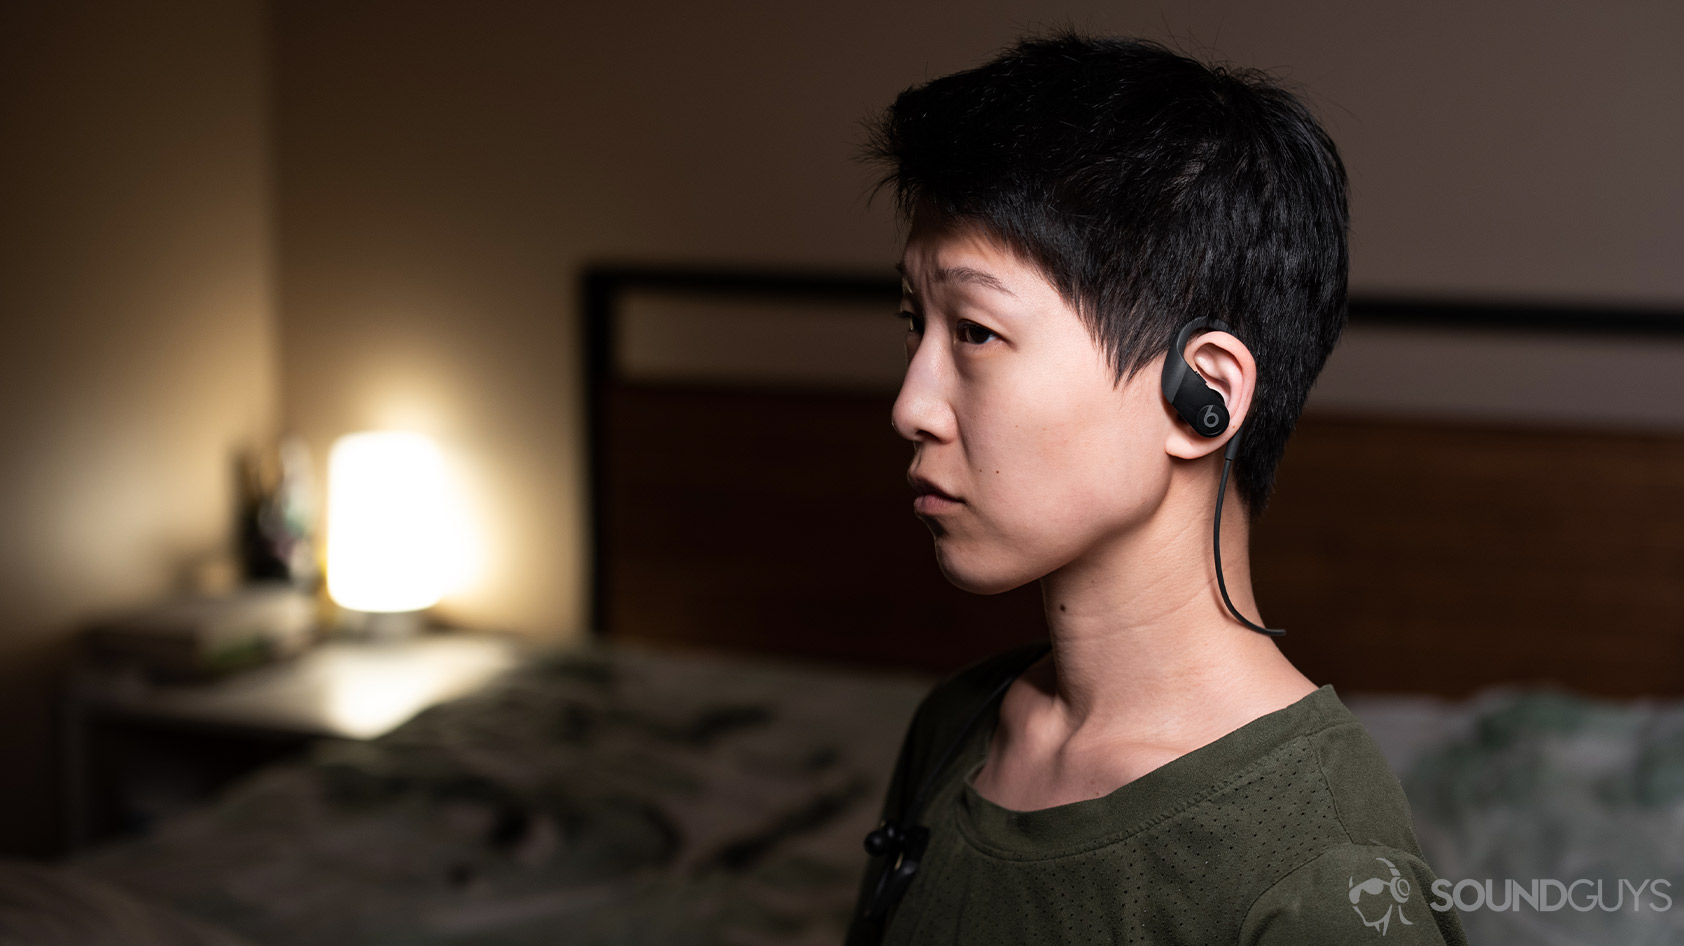 A picture of a woman wearing the Apple Beats Powerbeats workout earbuds in a bedroom.